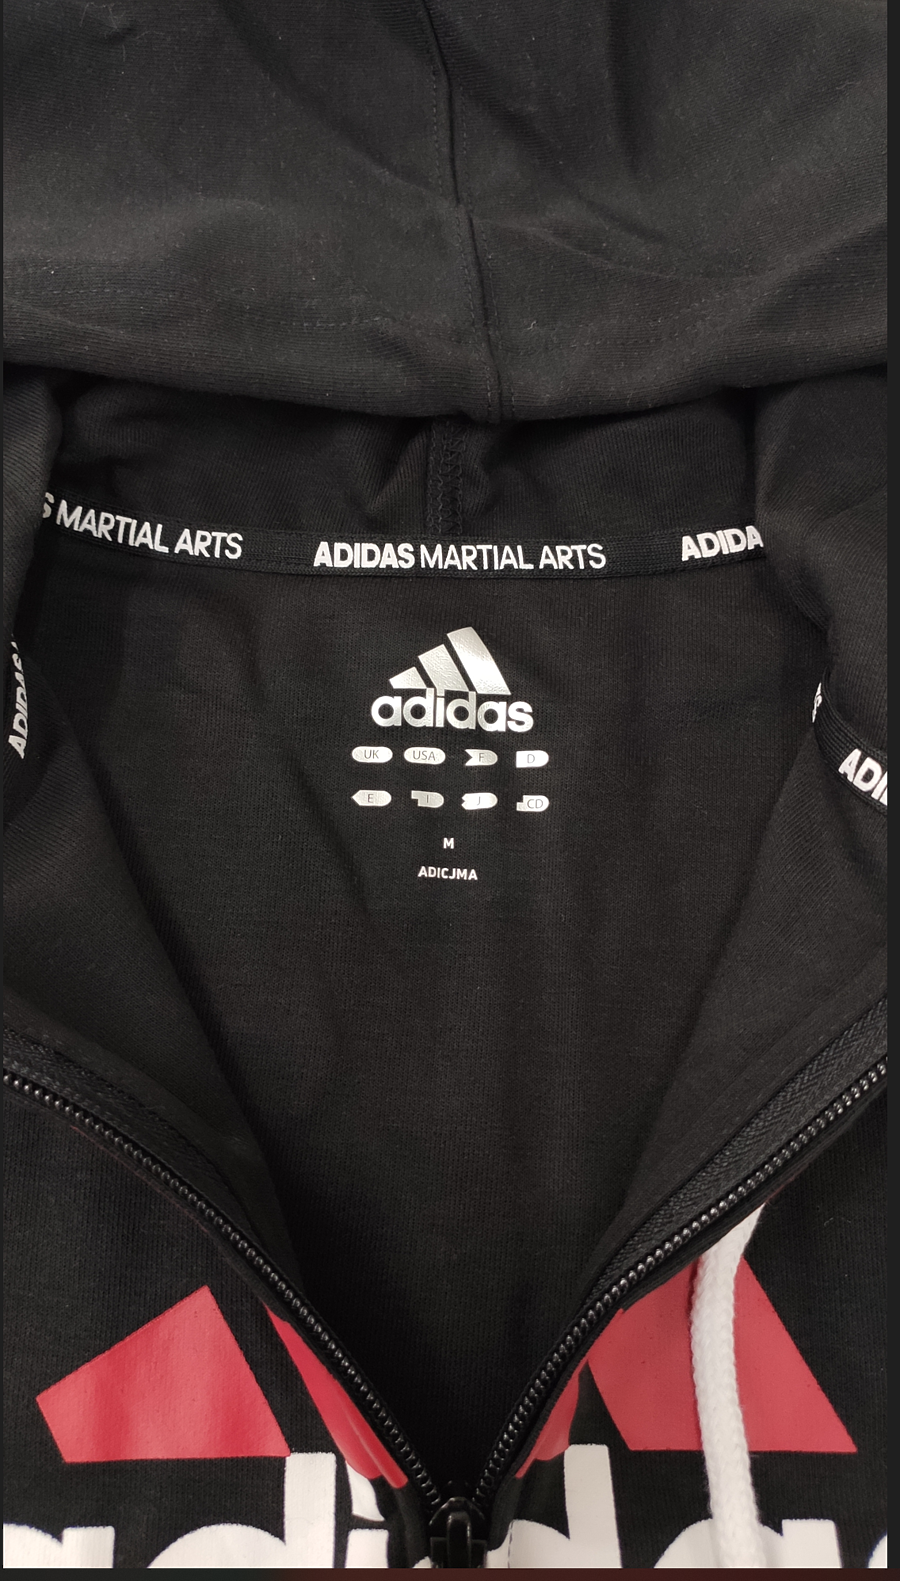 SPECIAL OFFER Adidas hoodie for couple models Size：M #530896 replica